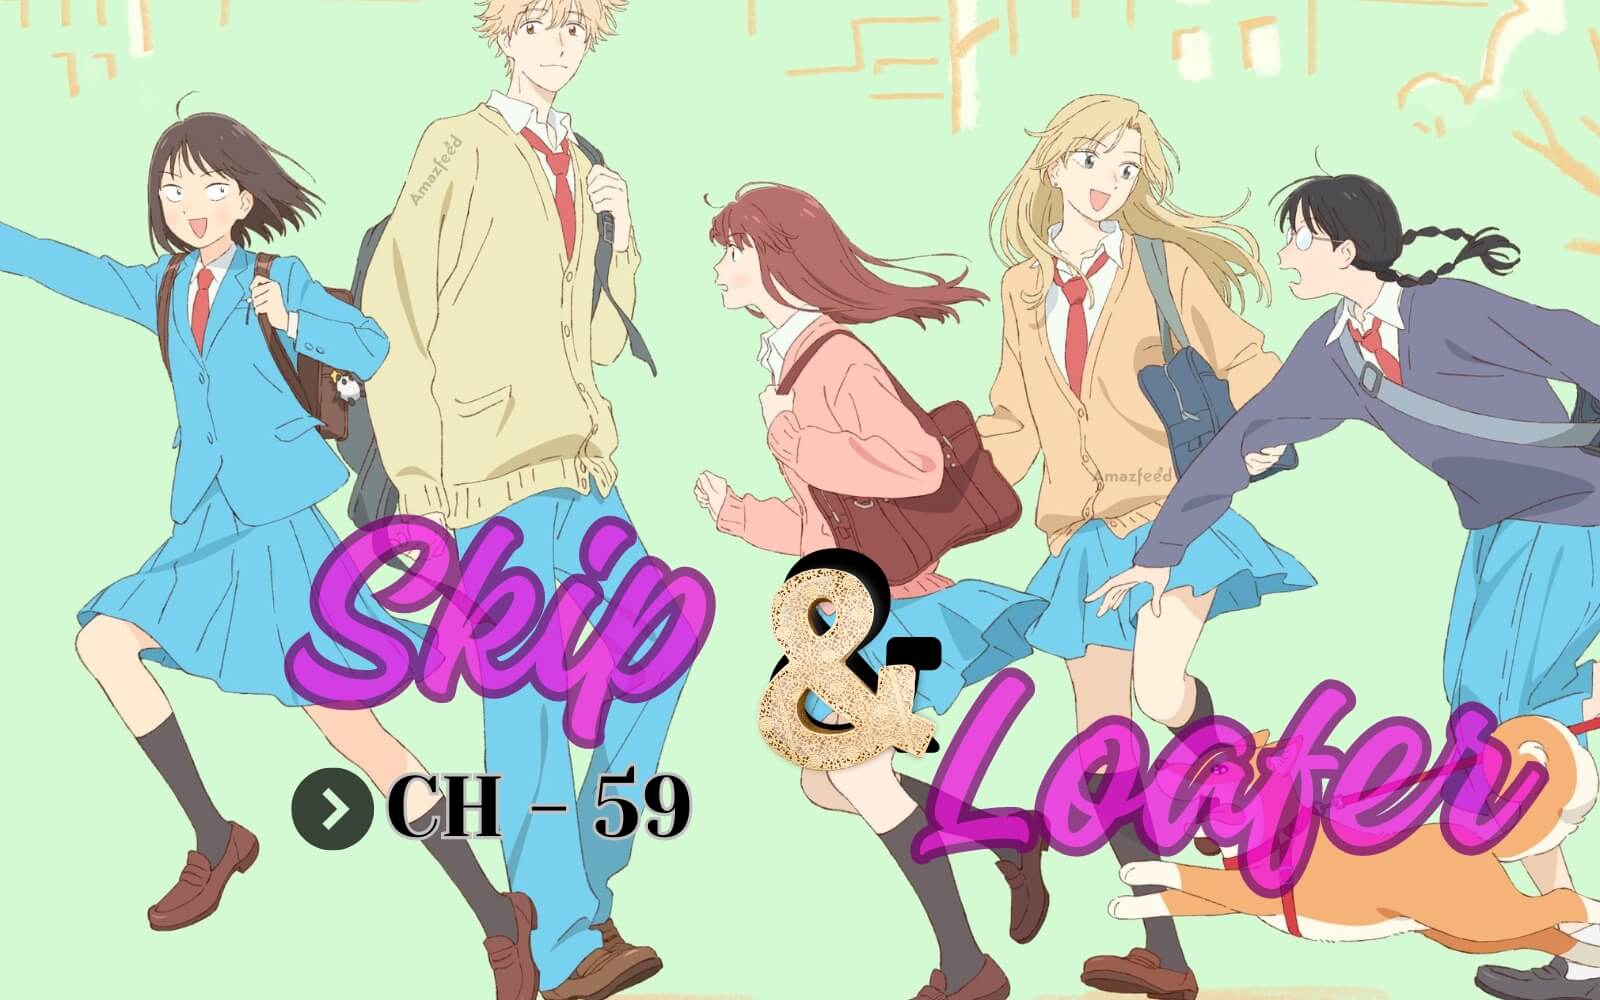 Skip and loafer ch 59